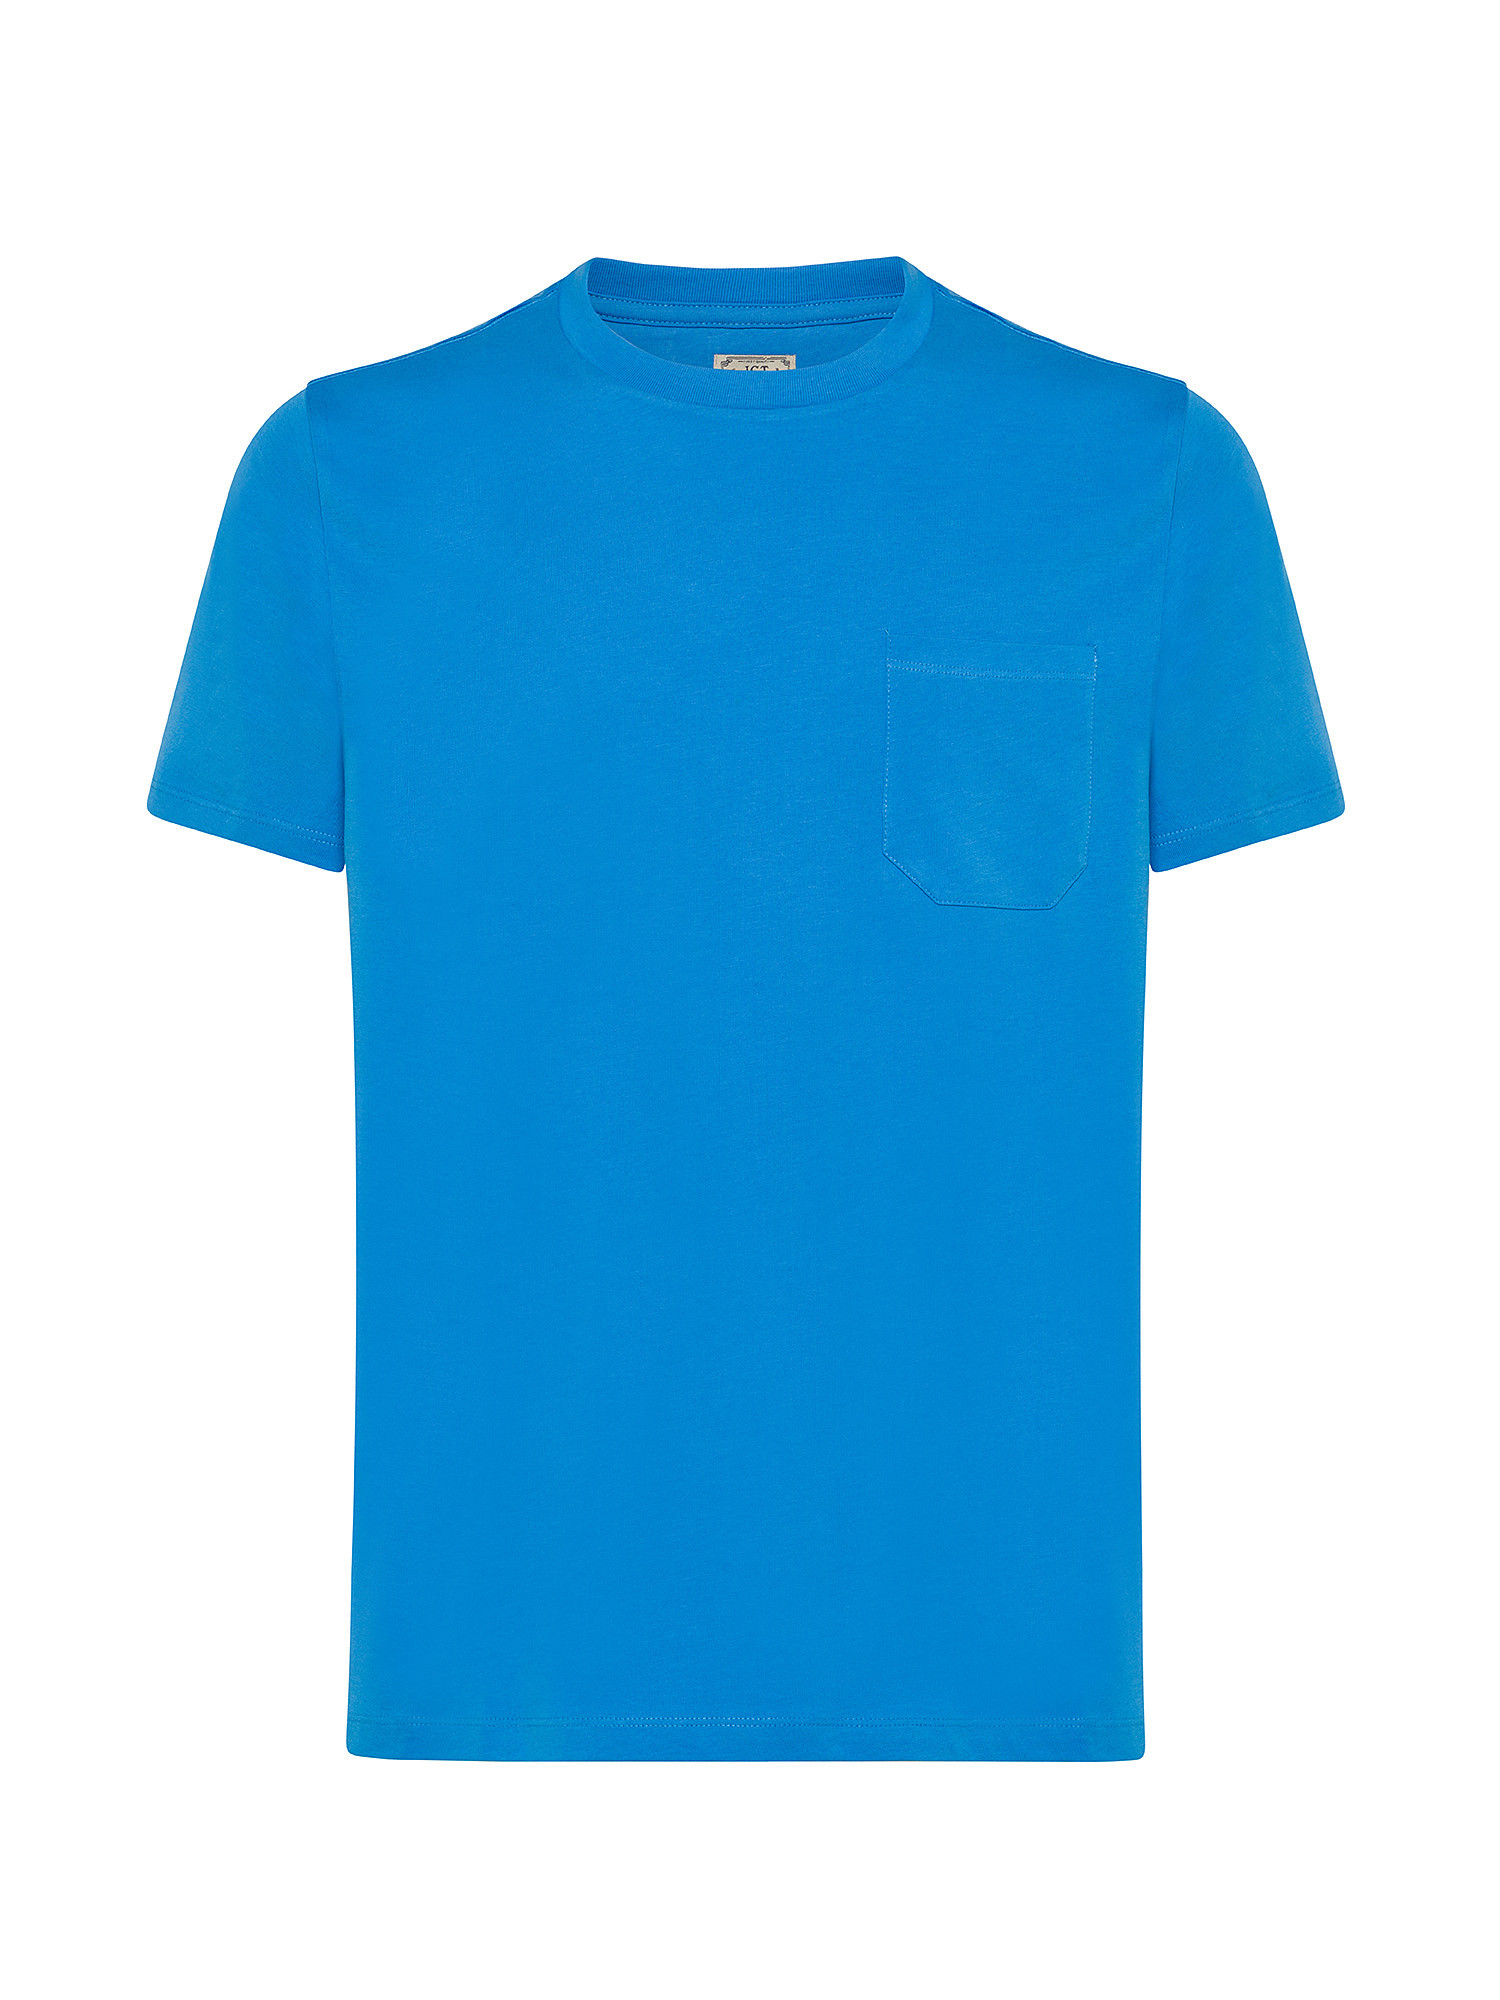 JCT - T-shirt in puro cotone supima, Azzurro, large image number 0